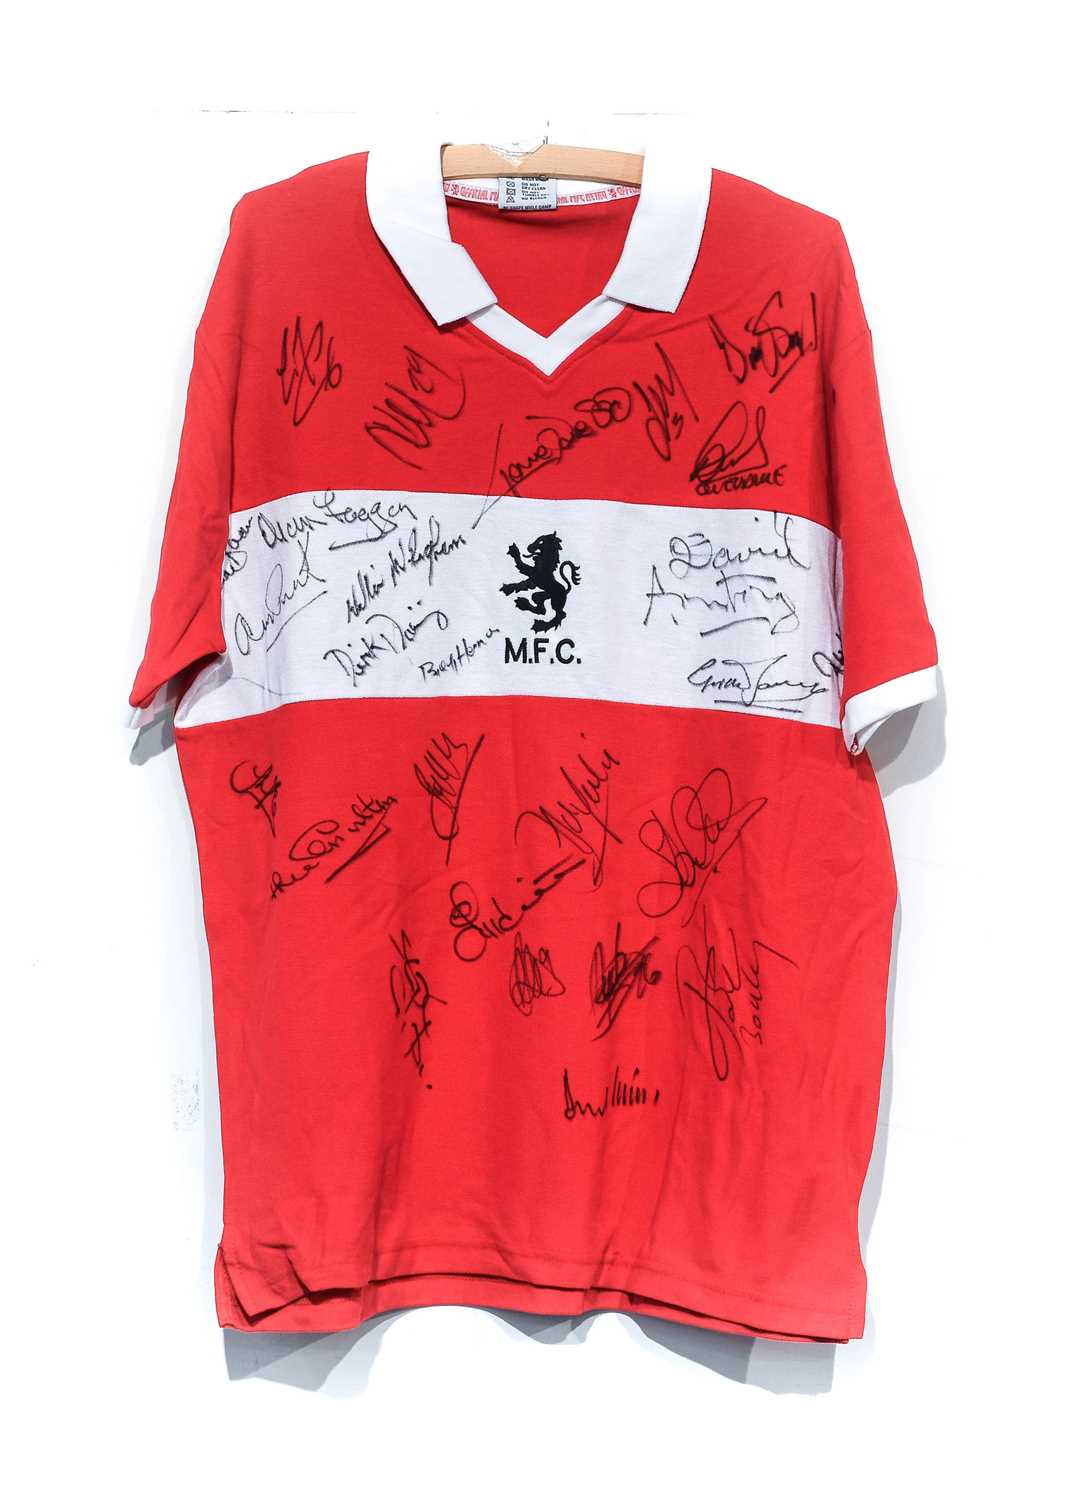 Middlesbrough Three Signed Football Shirts - Image 4 of 7